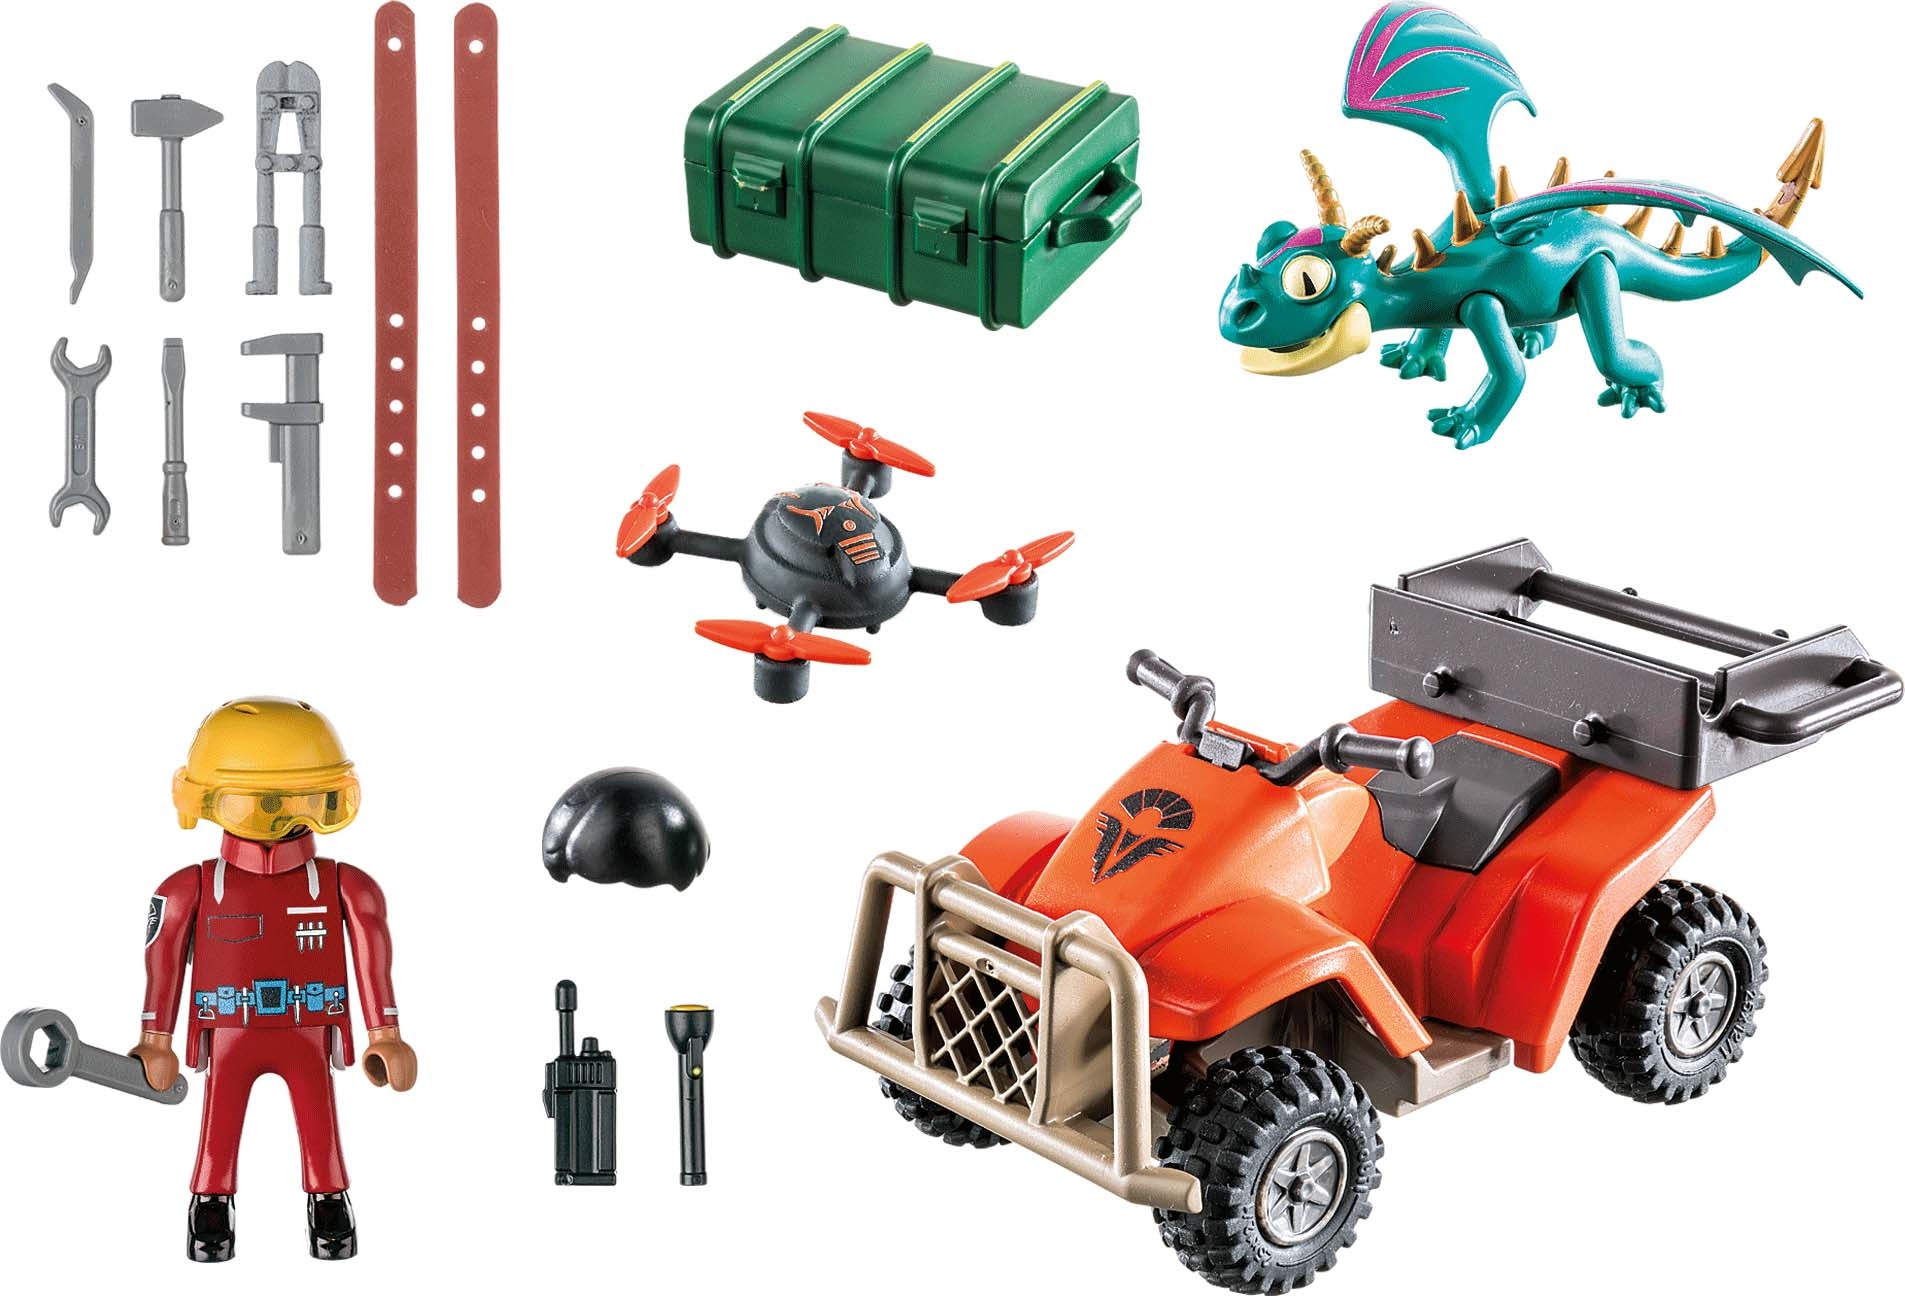 Playmobil® Konstruktions-Spielset »Dragons: The Nine Realms - Icaris Quad & Phil (71085)«, (28 St.), Made in Europe